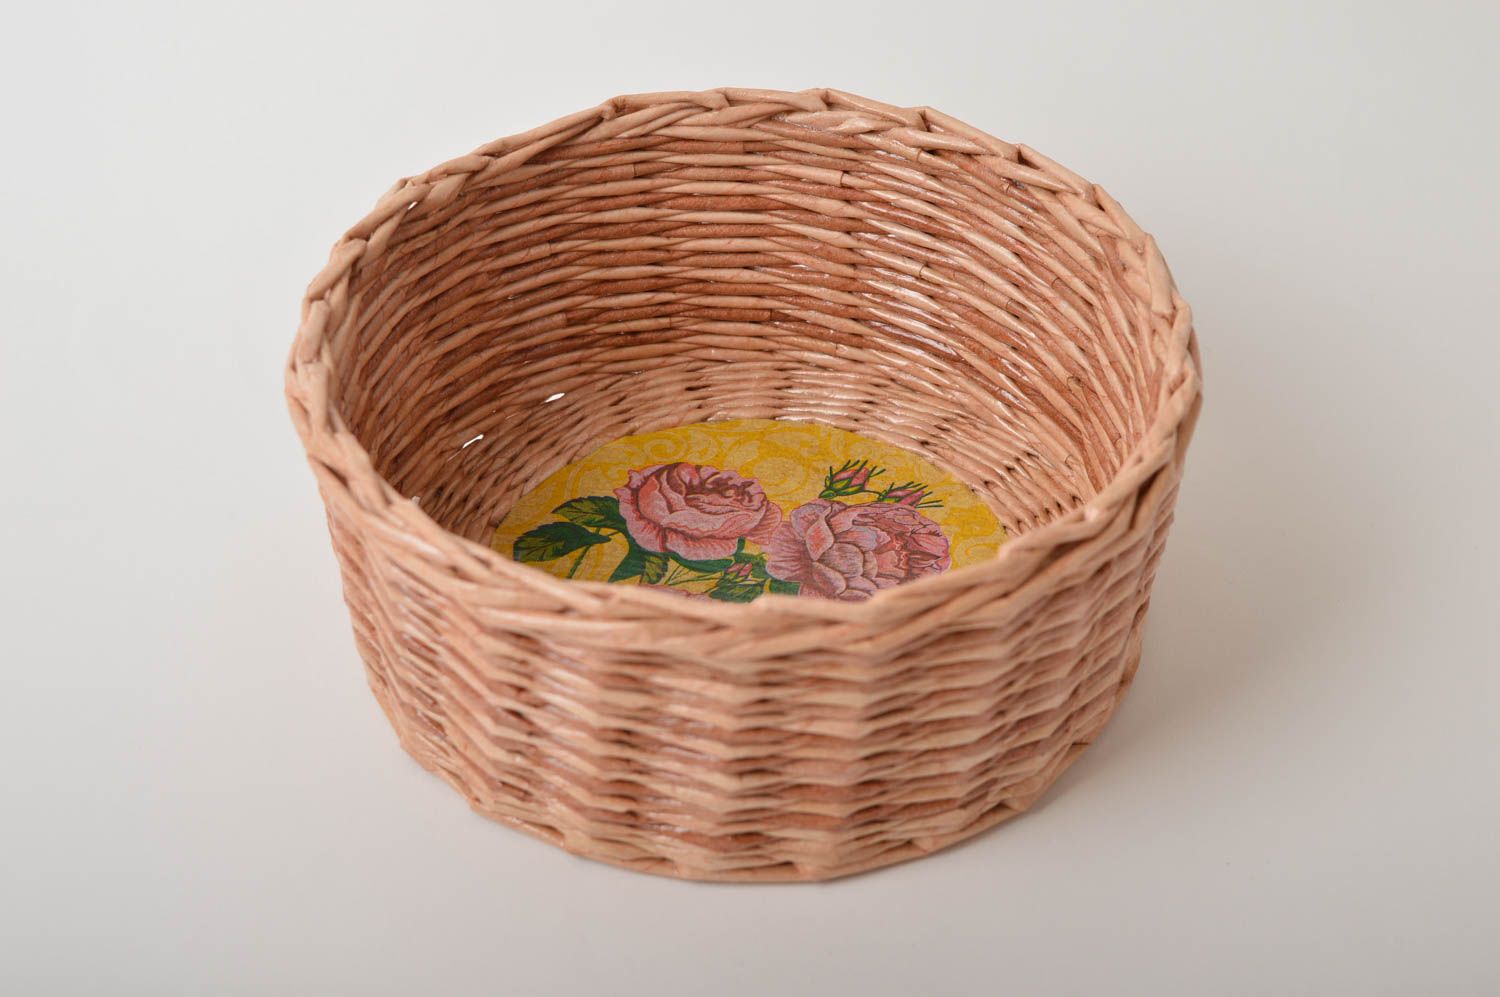 Paper basket homemade home decor storage basket small wicker basket cool gifts photo 4